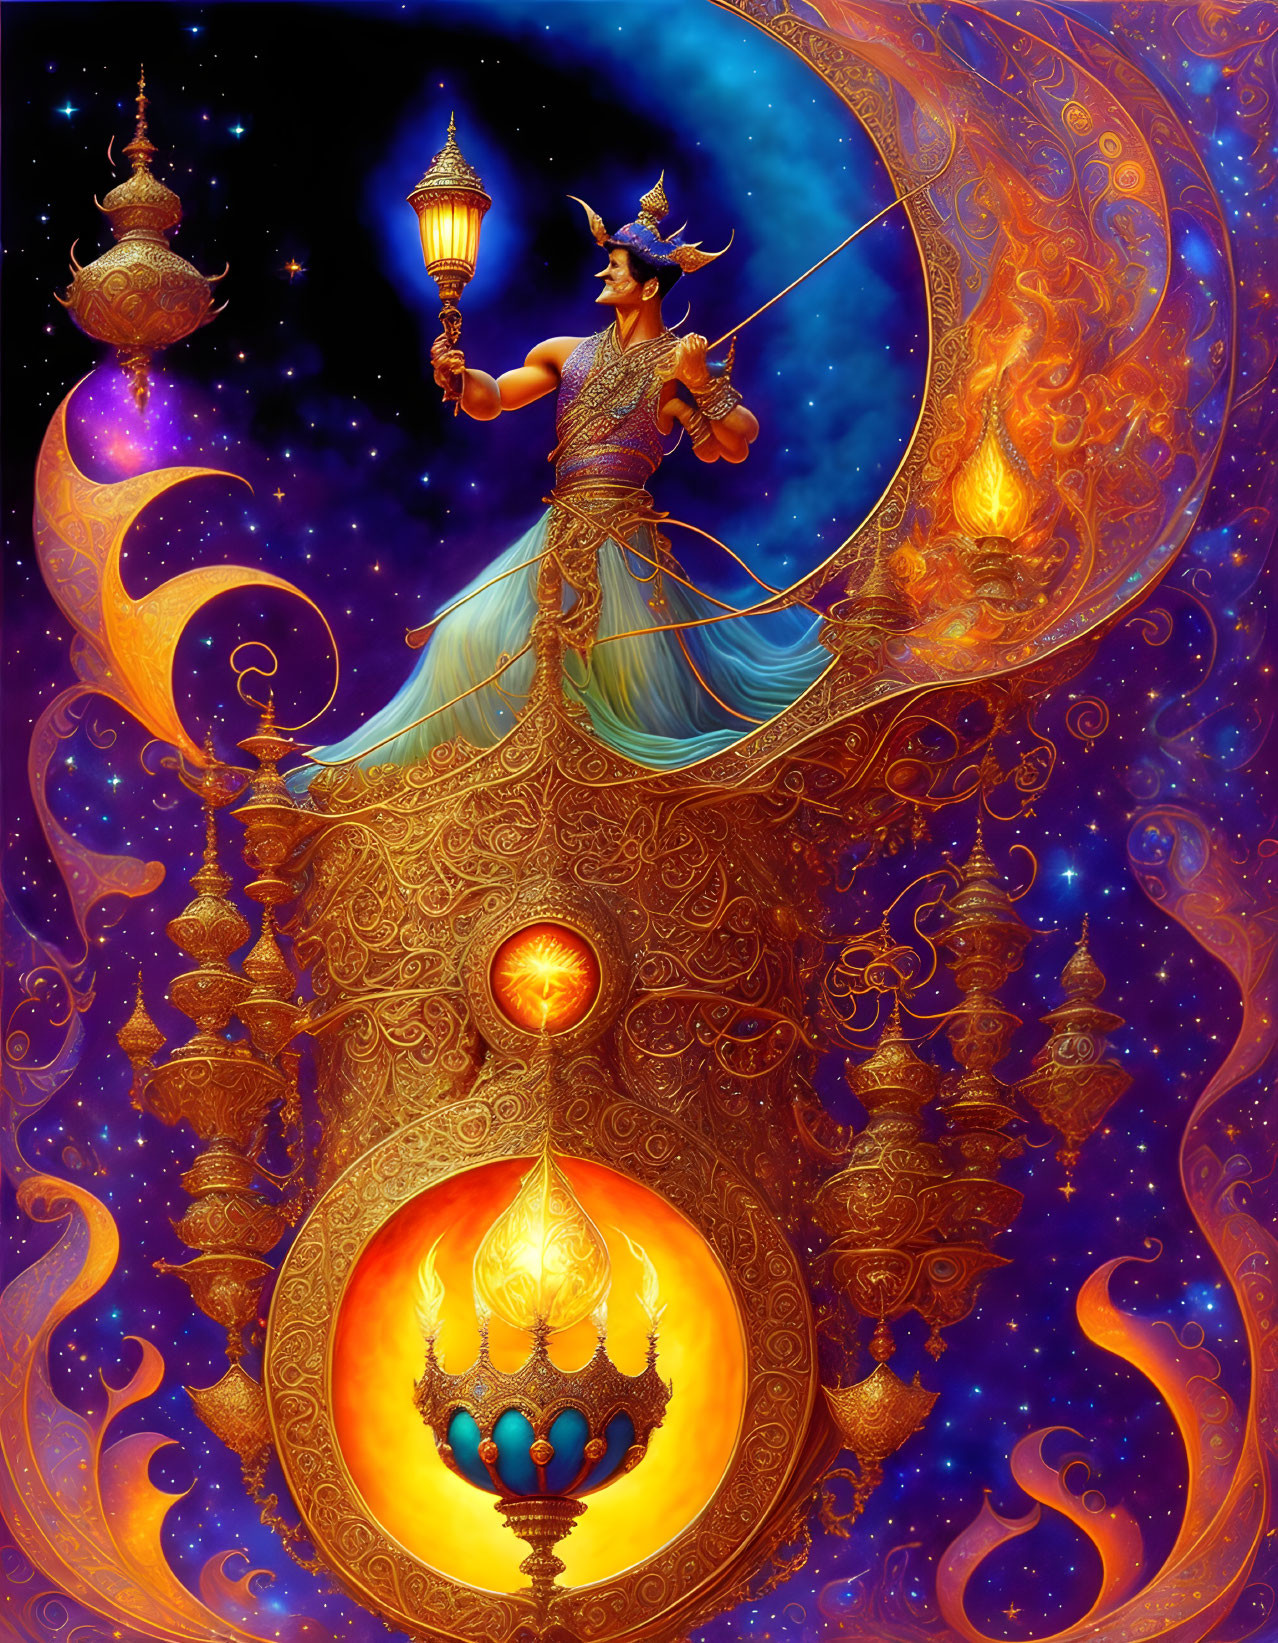 Deity with bow on crescent moon under starry sky